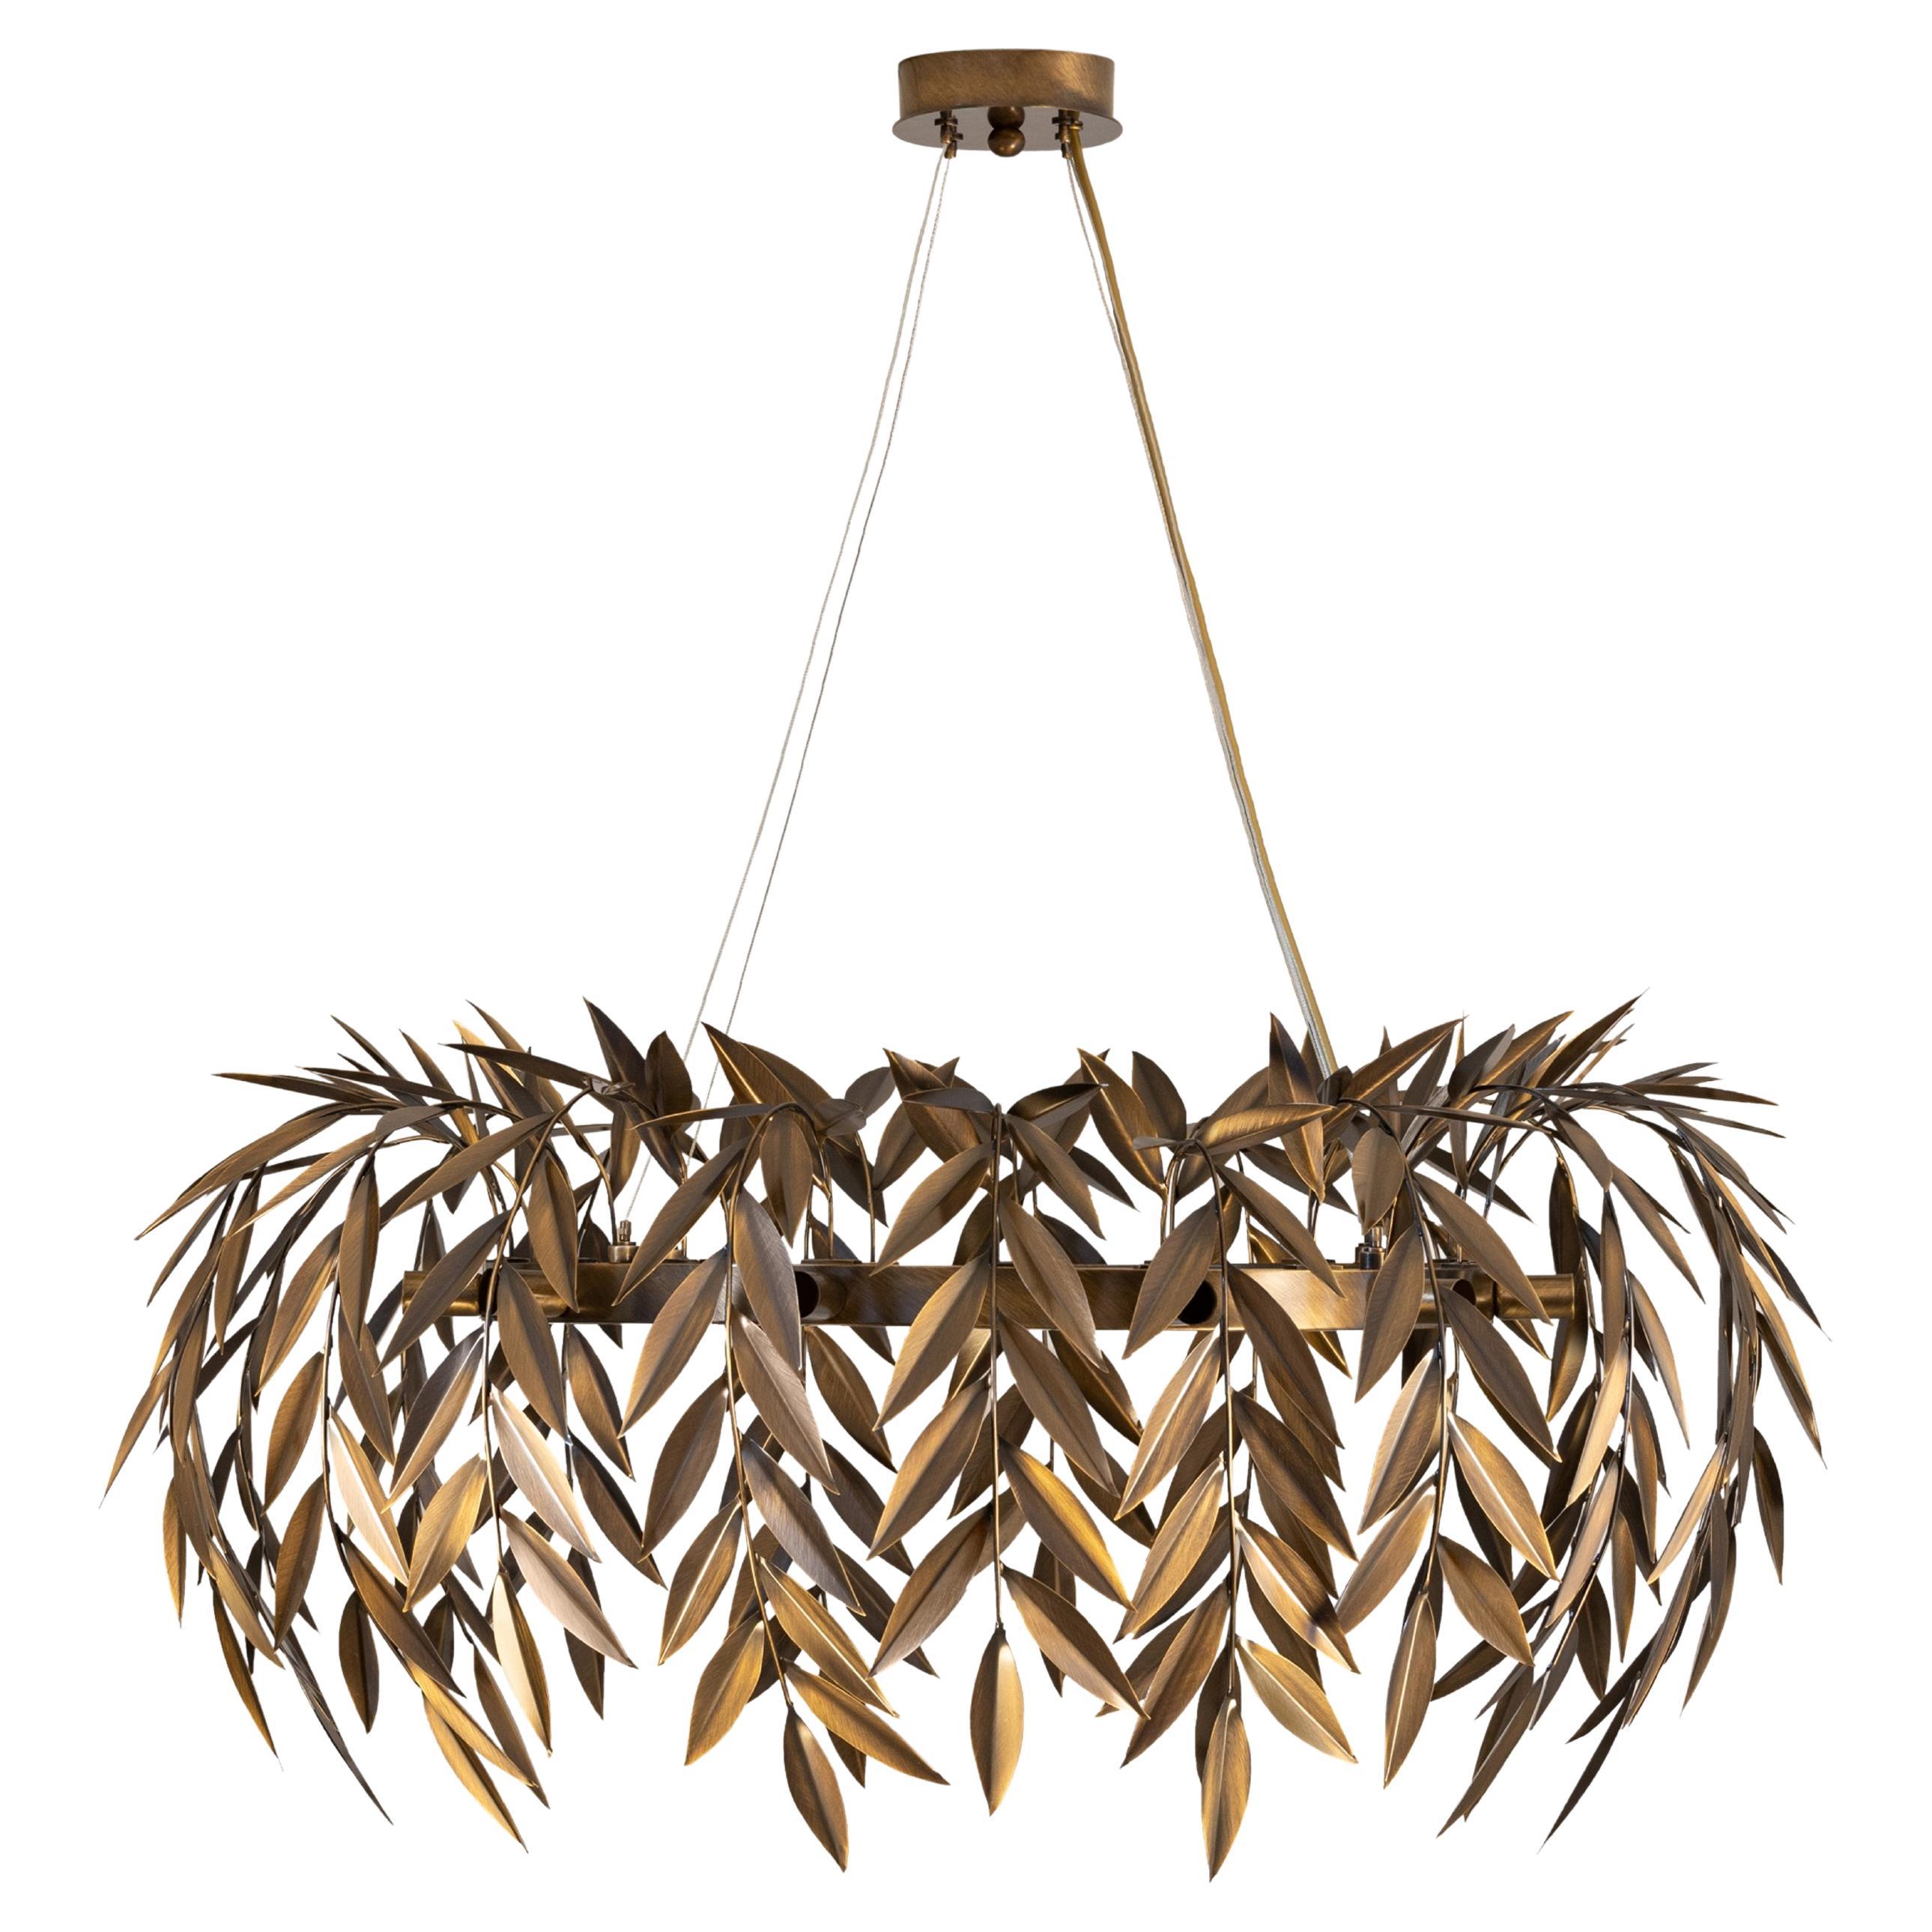 Azores Chandelier, Oxidized Brushed Brass, InsidherLand by Joana Santos Barbosa For Sale